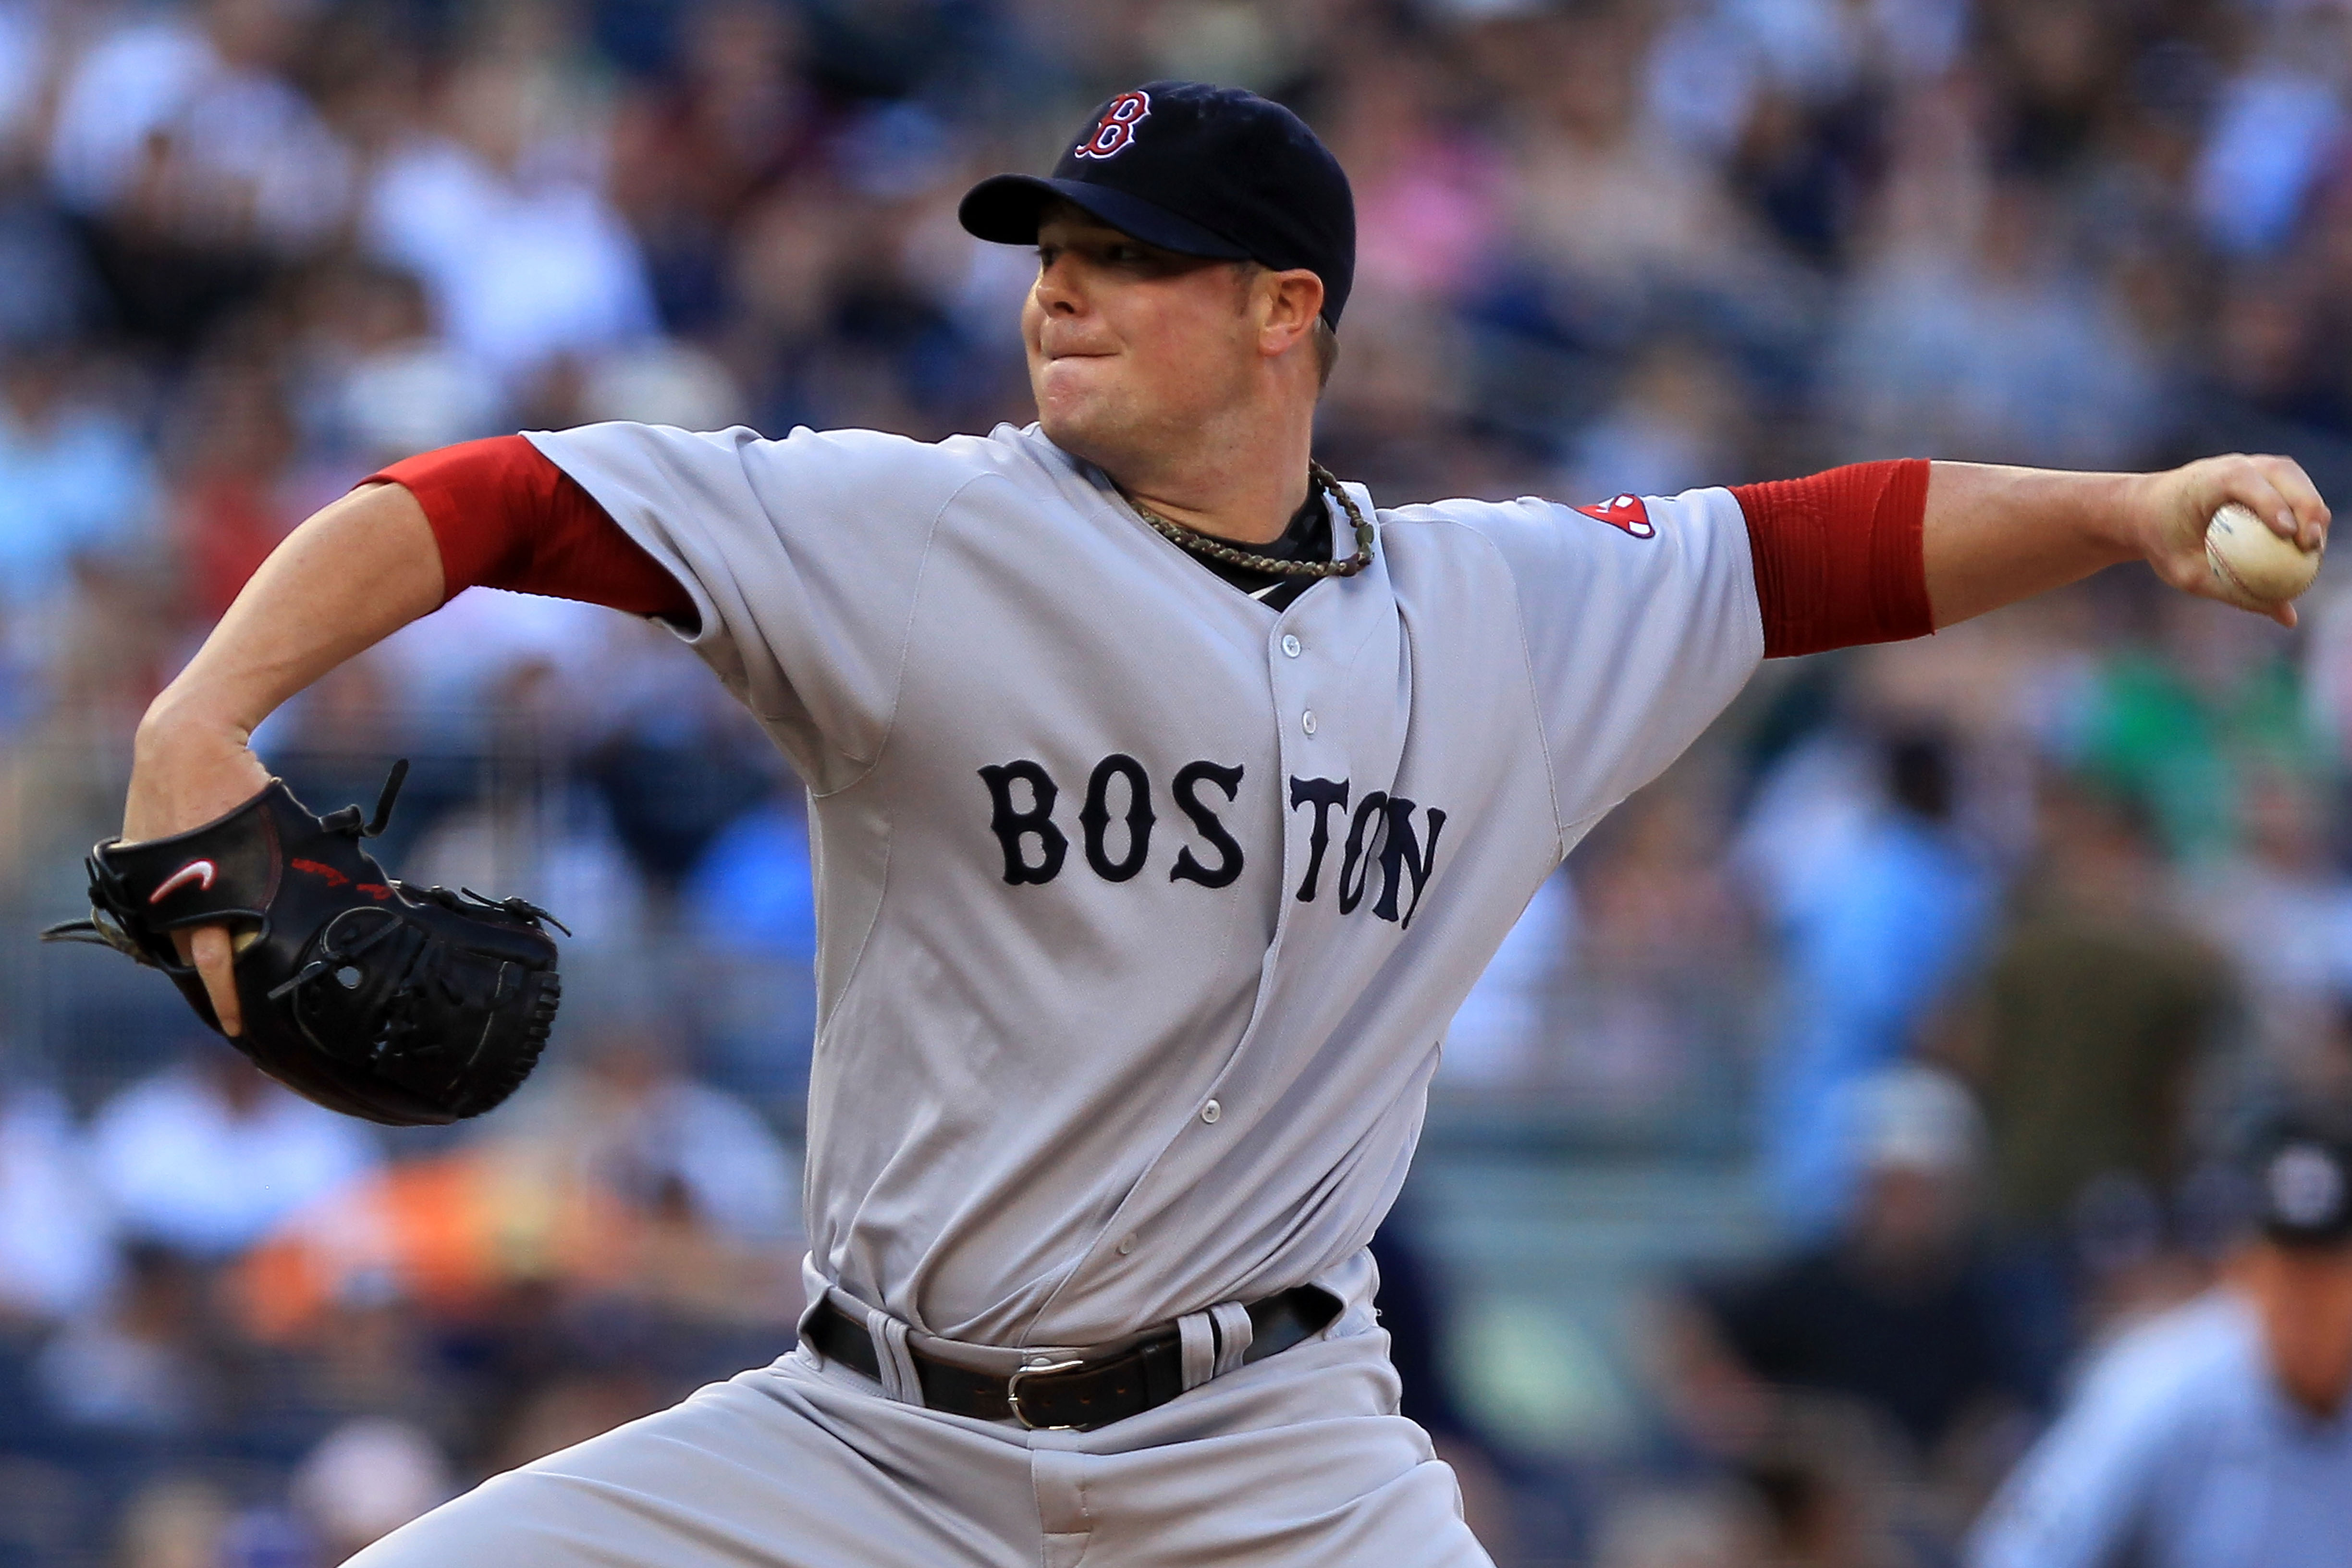 NEW YORK - SEPTEMBER 25:  Jon Lester #31 of the Boston Red Sox pitches against the New York Yankees during their game on September 25, 2010 at Yankee Stadium in the Bronx borough of New York City.  (Photo by Chris McGrath/Getty Images)